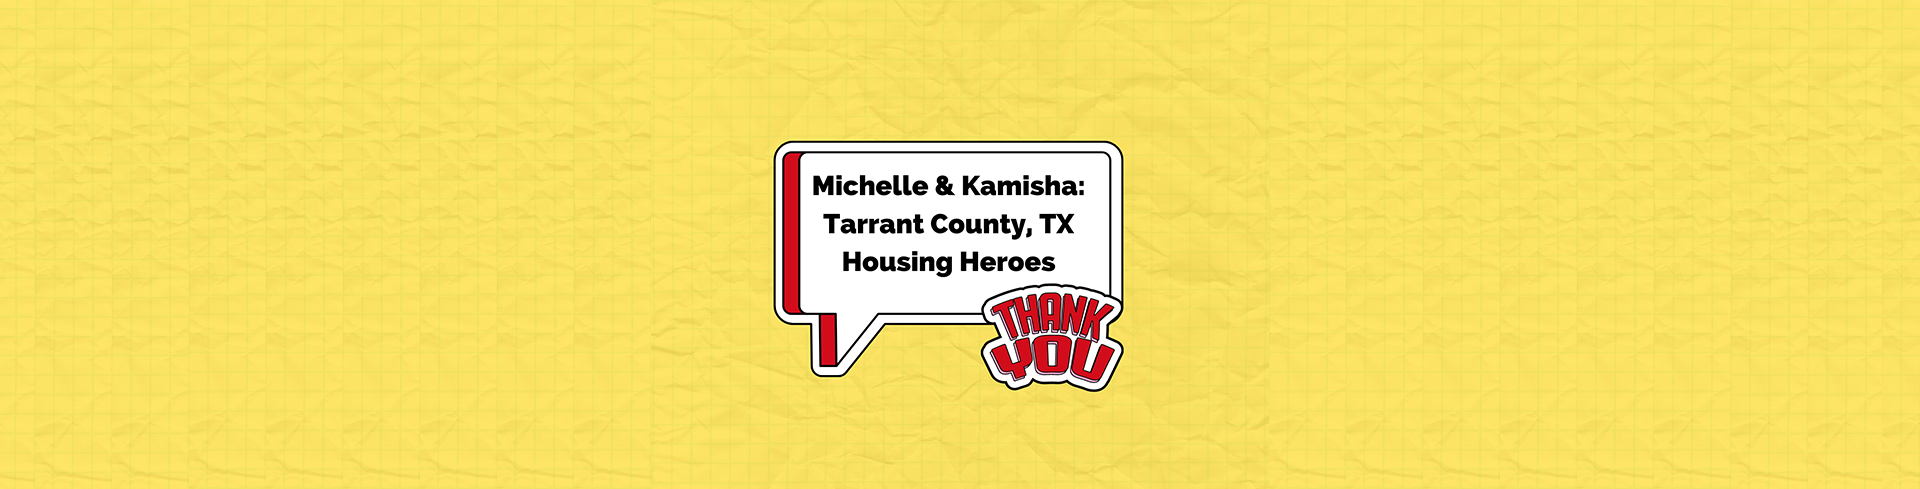 Image with text - Michelle & Kamisha Tarrant County, TX Housing Heroes